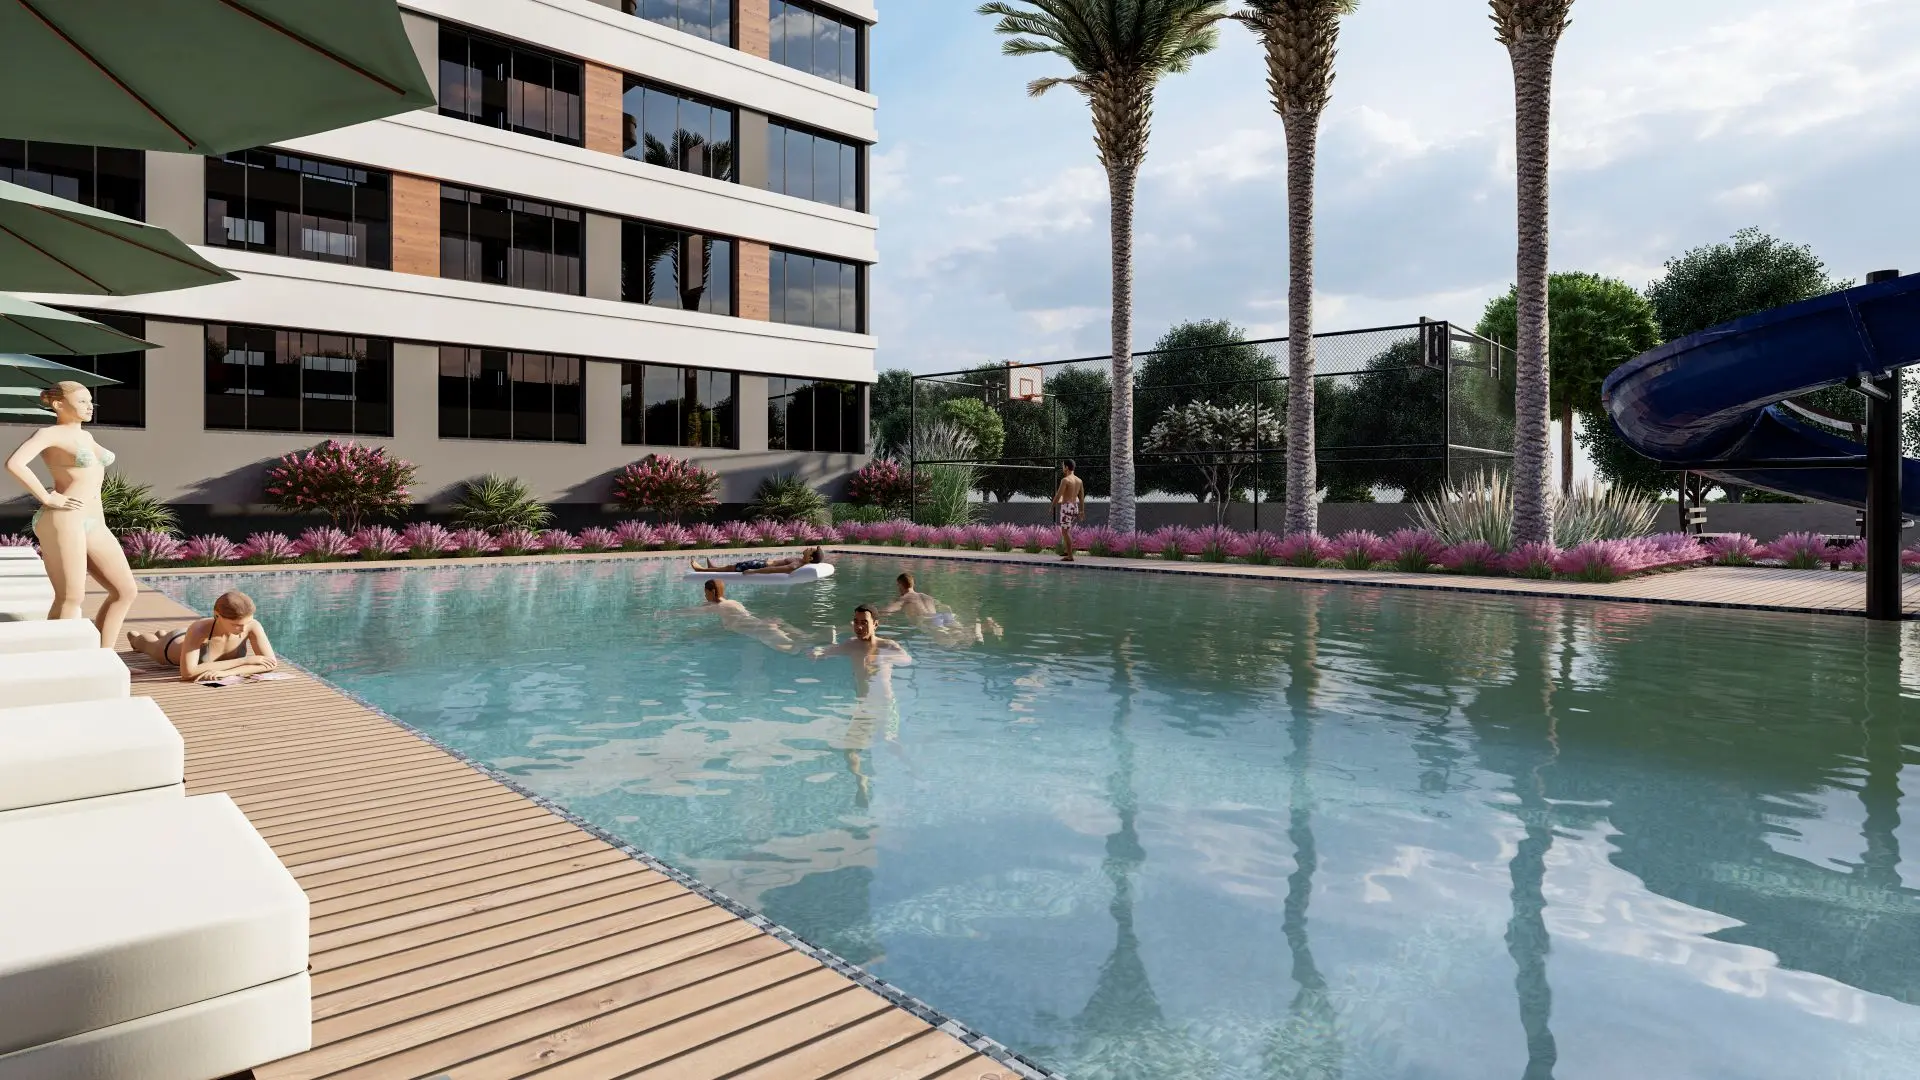 A GREAT COMPLEX PROJECT IN MERSIN - AMAZING PRICES!